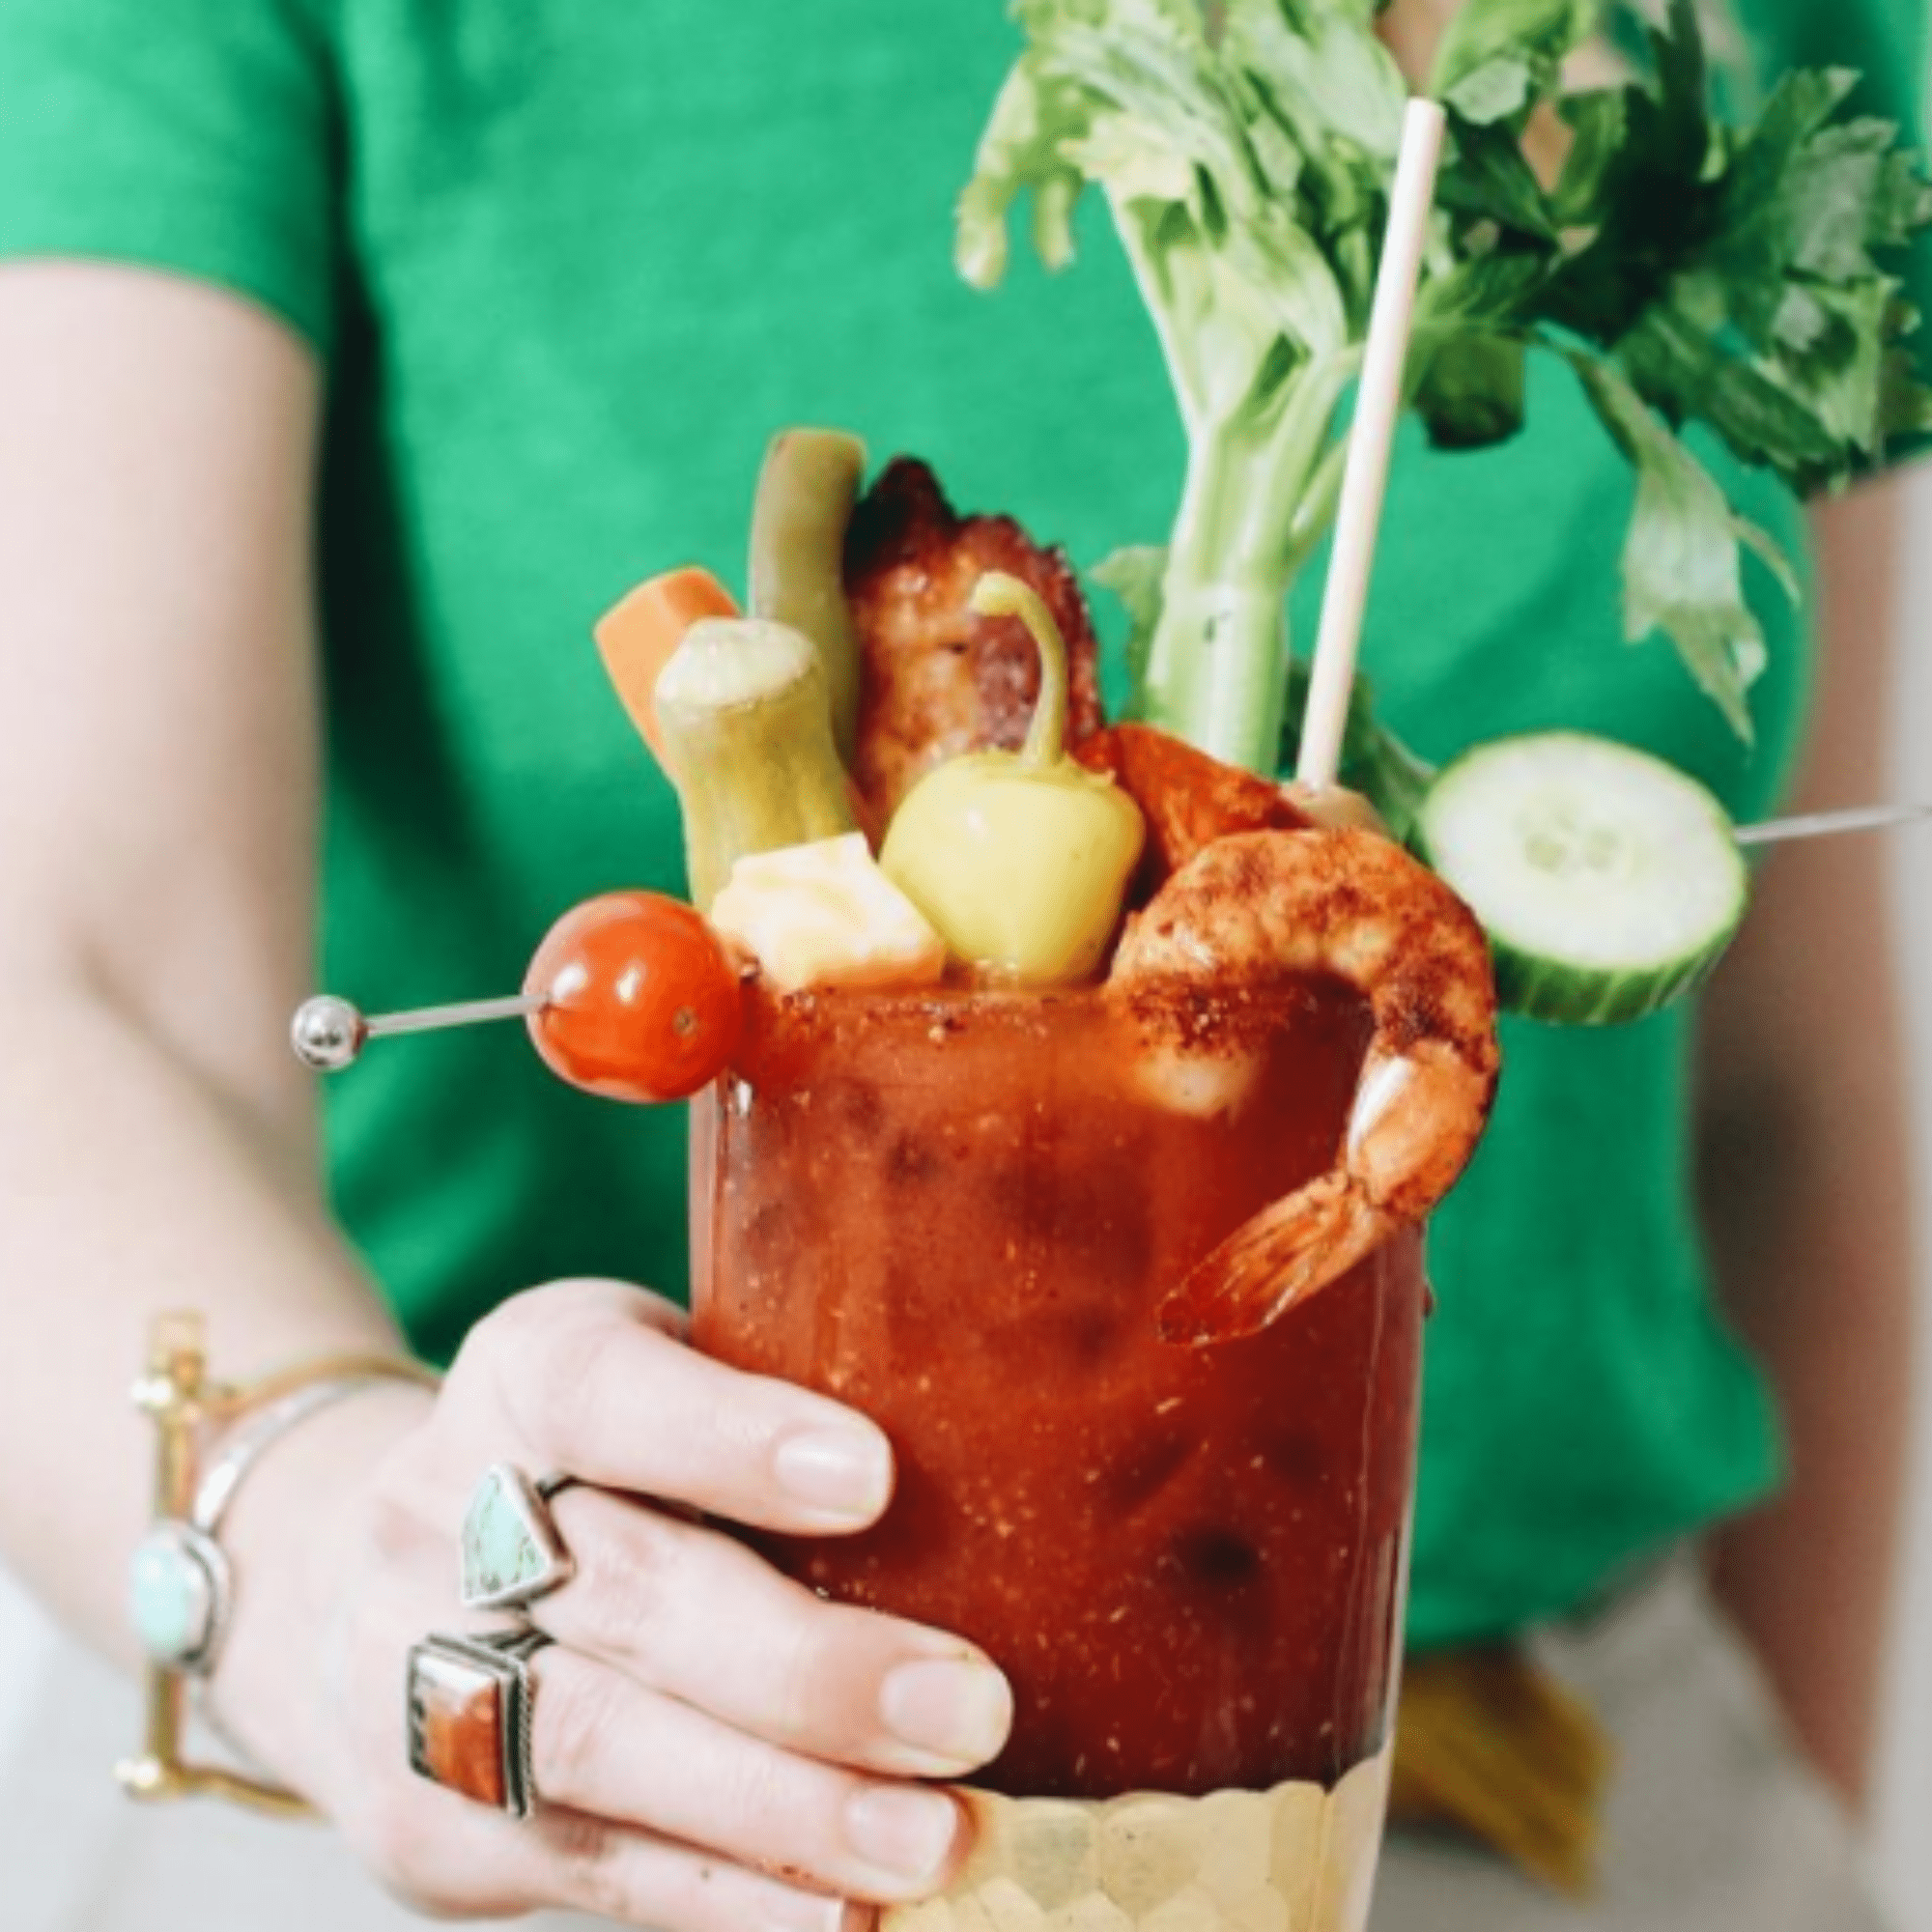 bloody mary with many garnishes and a tall wheat straw